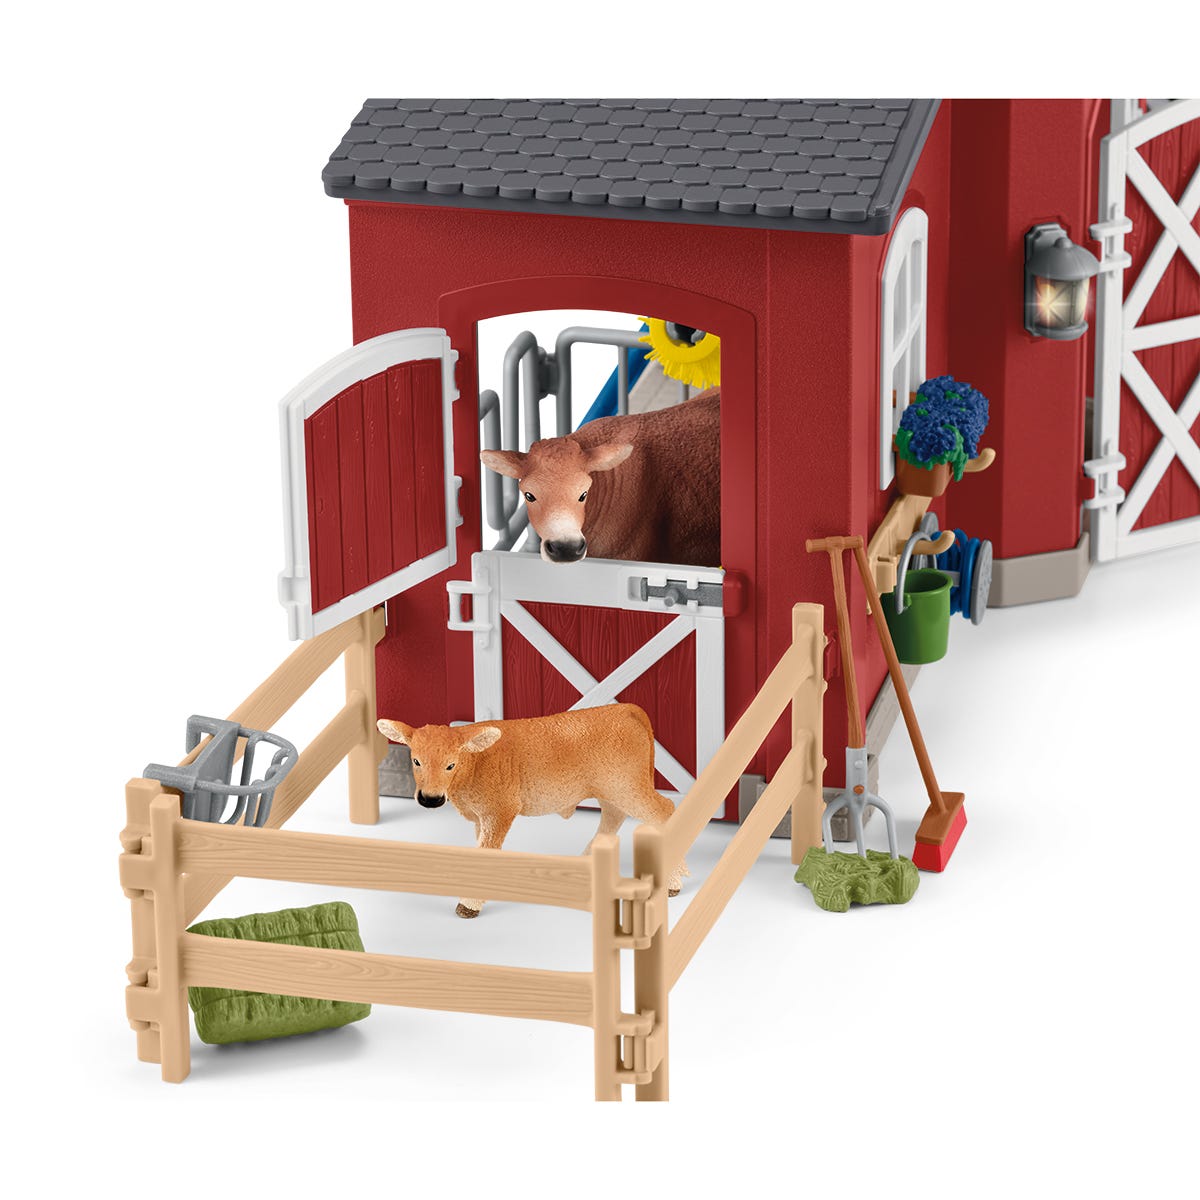 Large Barn with Animals and Accessories